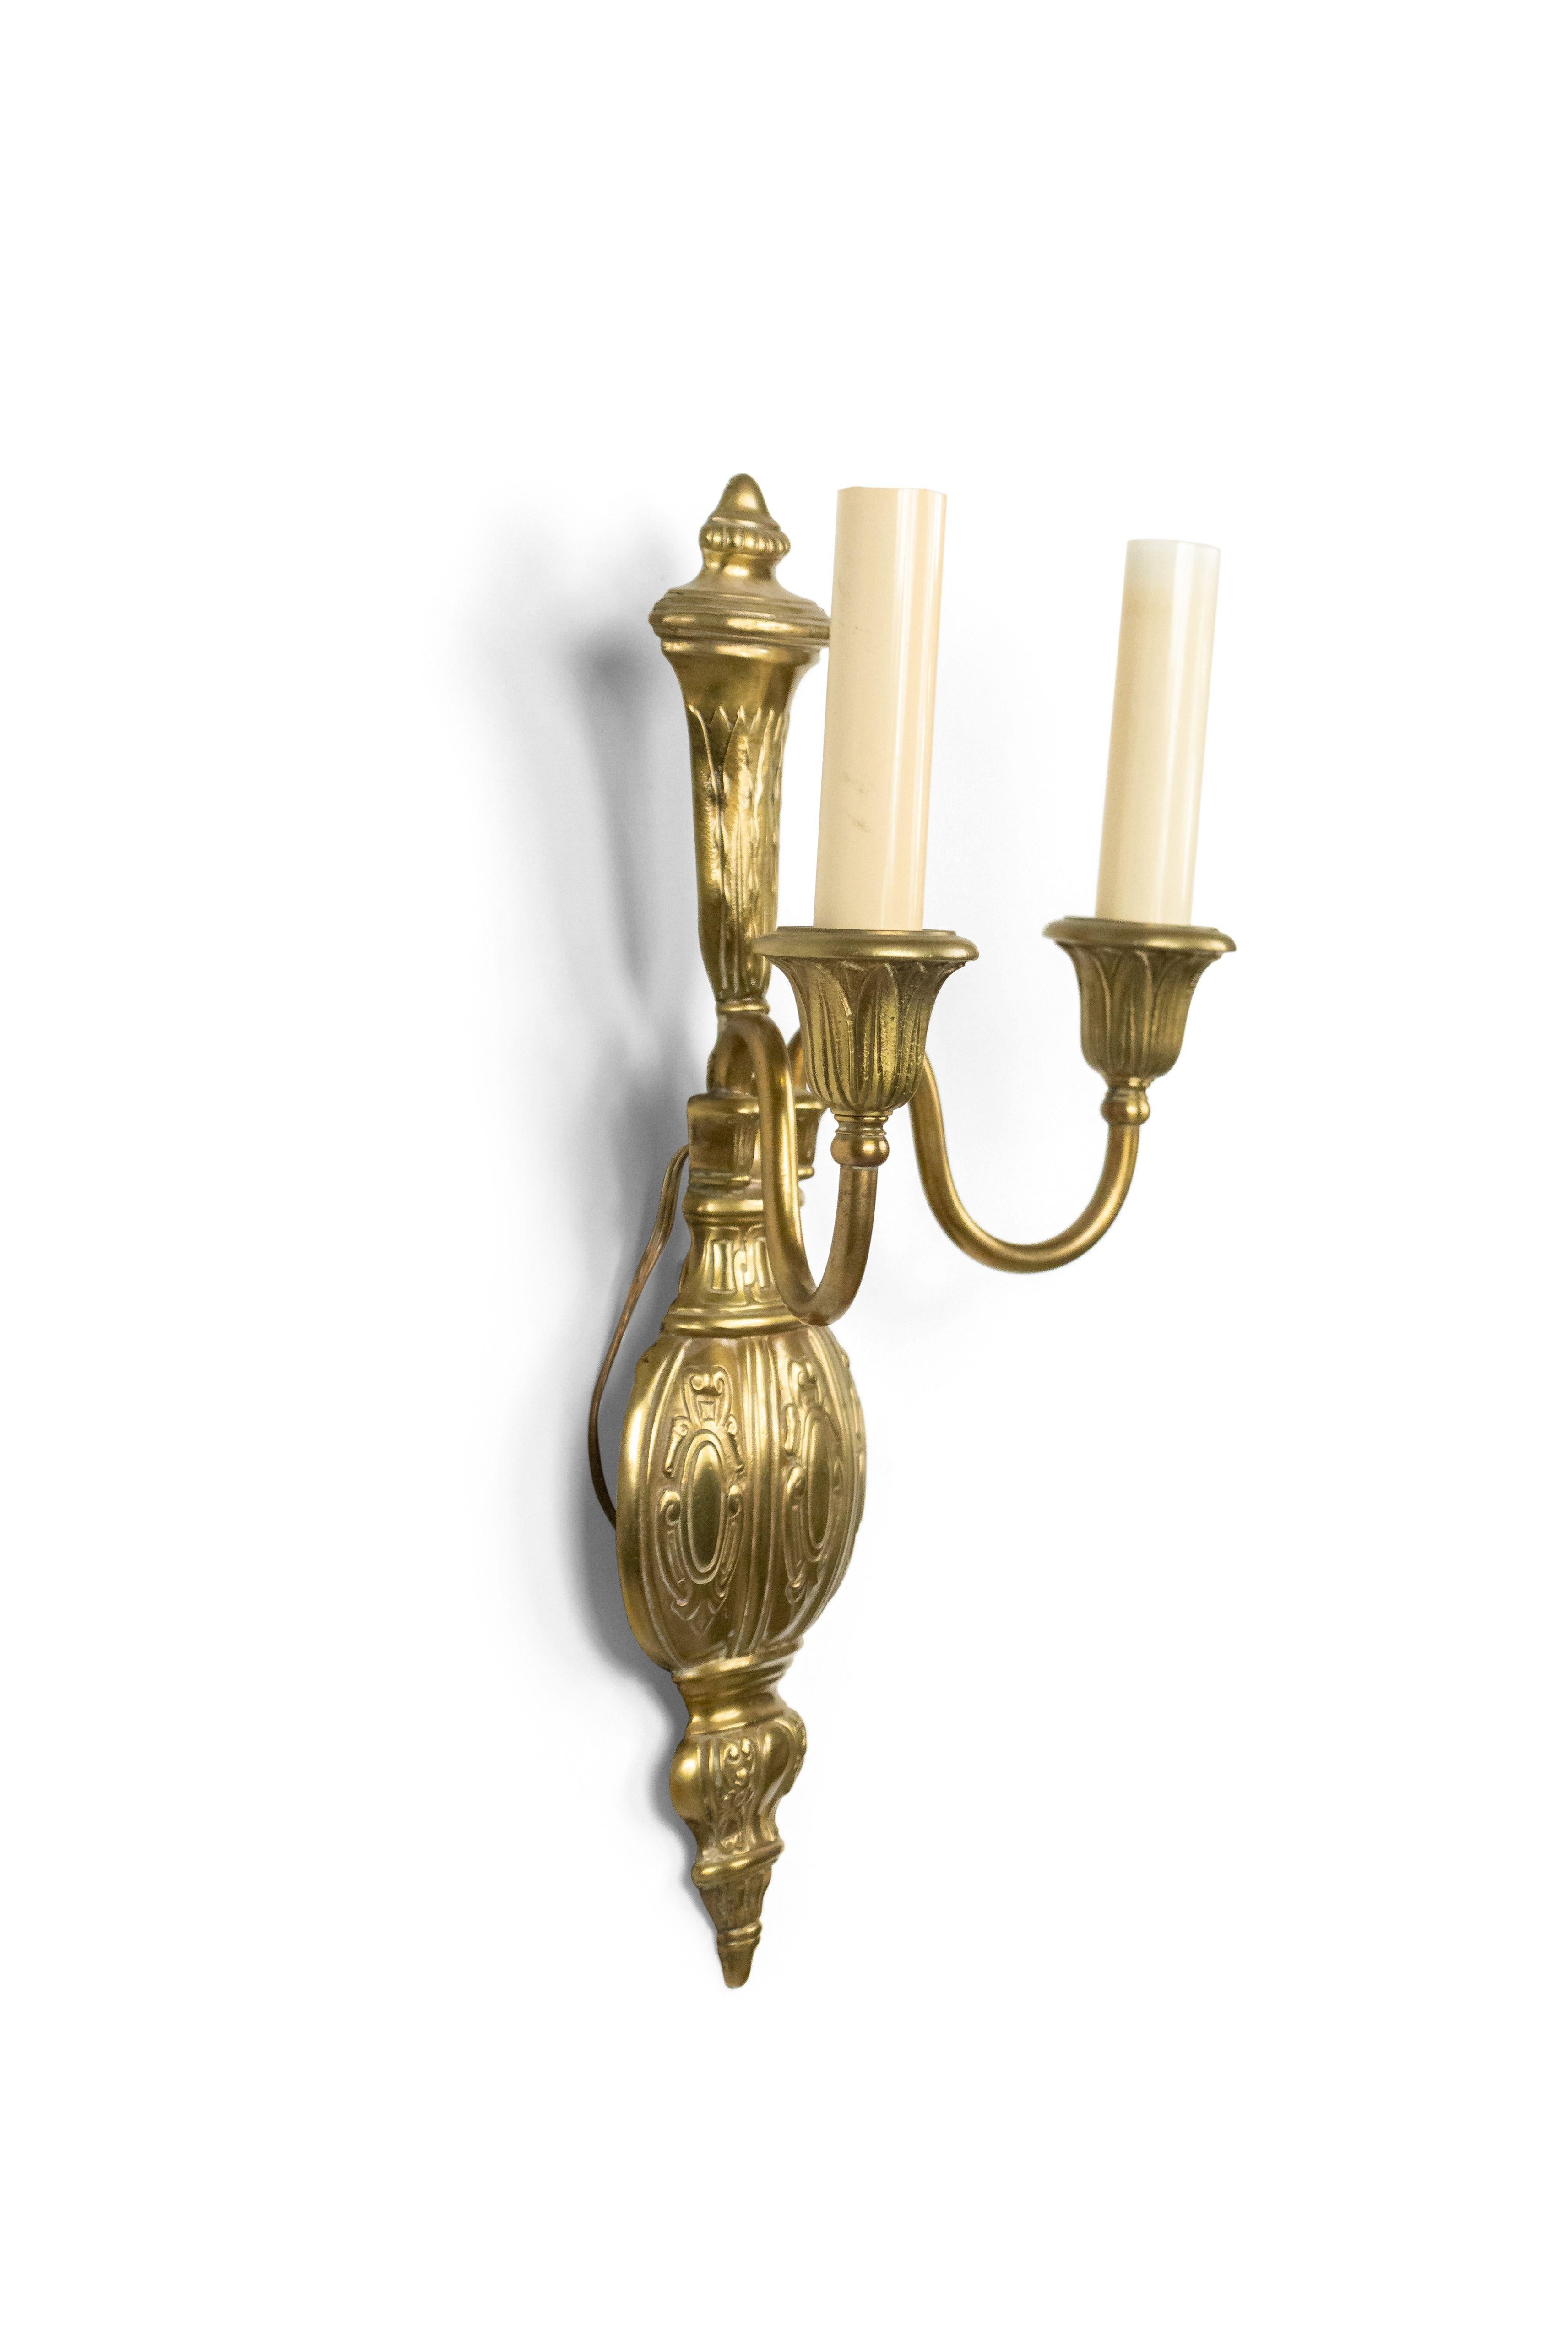 3 English Georgian style brass 2-arm wall sconces with leaf cast vasiform back plate, 20th century (priced each).